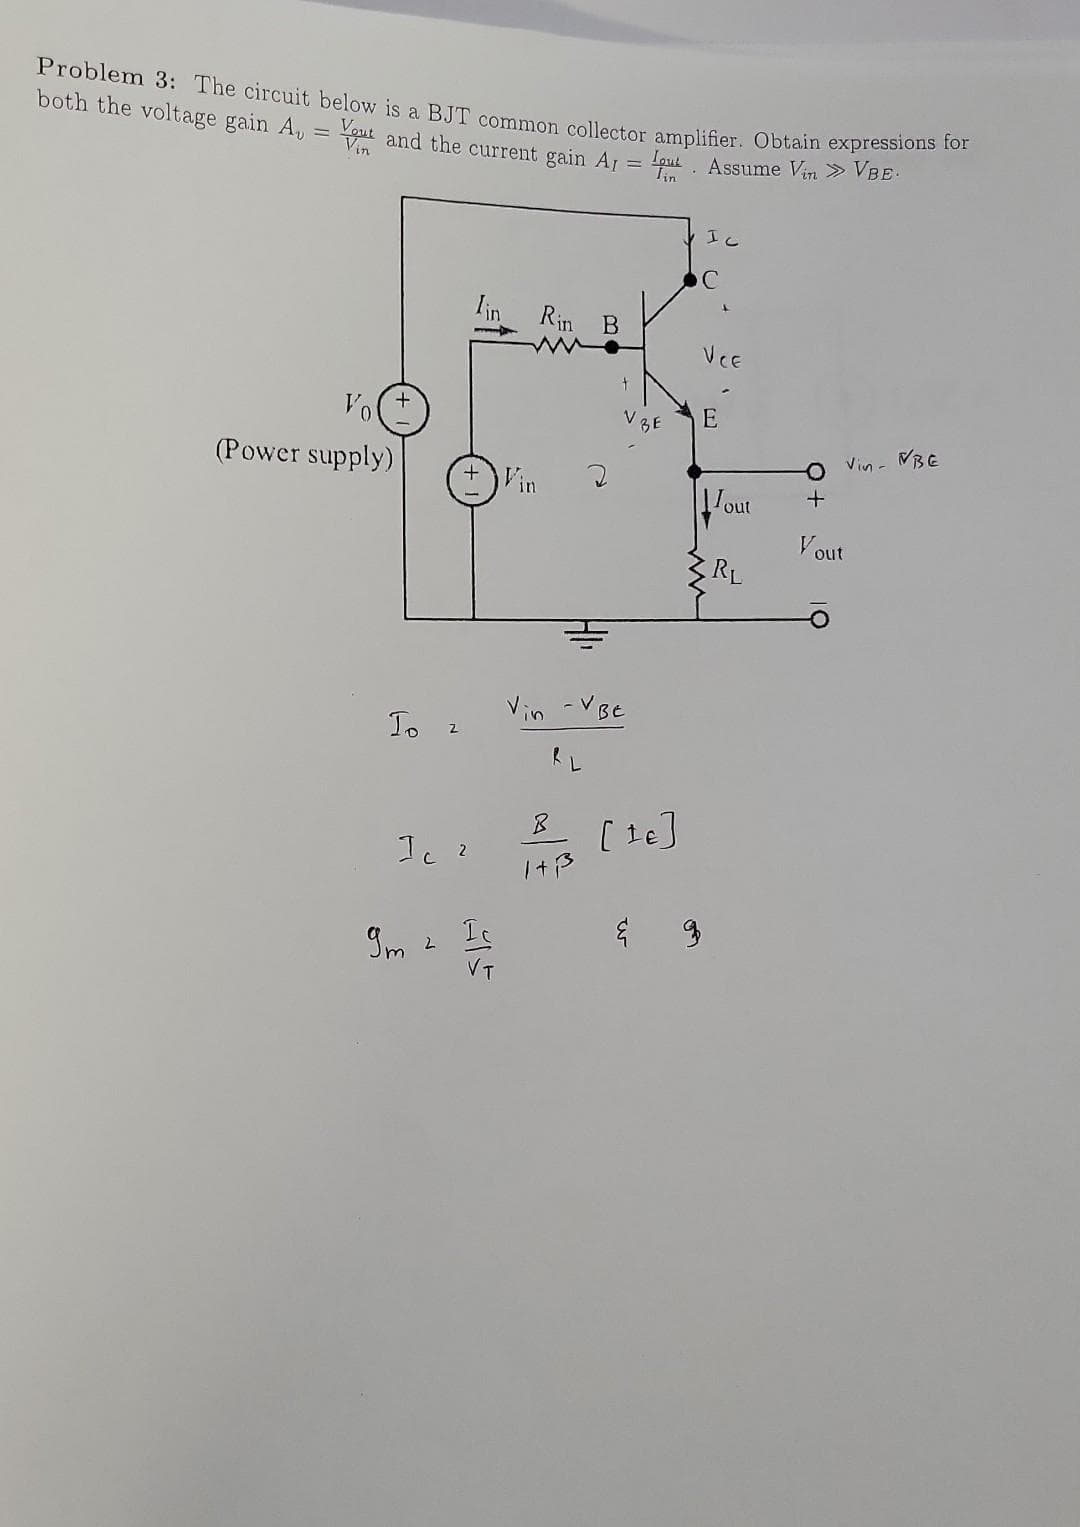 Problem 3: The circuit below is a BJT common collector amplifier. Obtain expressions for
both the voltage gain A, = You and the current gain A1 = put. Assume Vin » VBE.
Vol
(Power supply)
To 2
Tin
Ic 2
9m 2 Ic
VT
Rin B
www.
+
vin -VBE
RL
B
1+³
V BE
[te]
IC
VCE
E
Tout
RL
O Vin - VBE
+
Vout